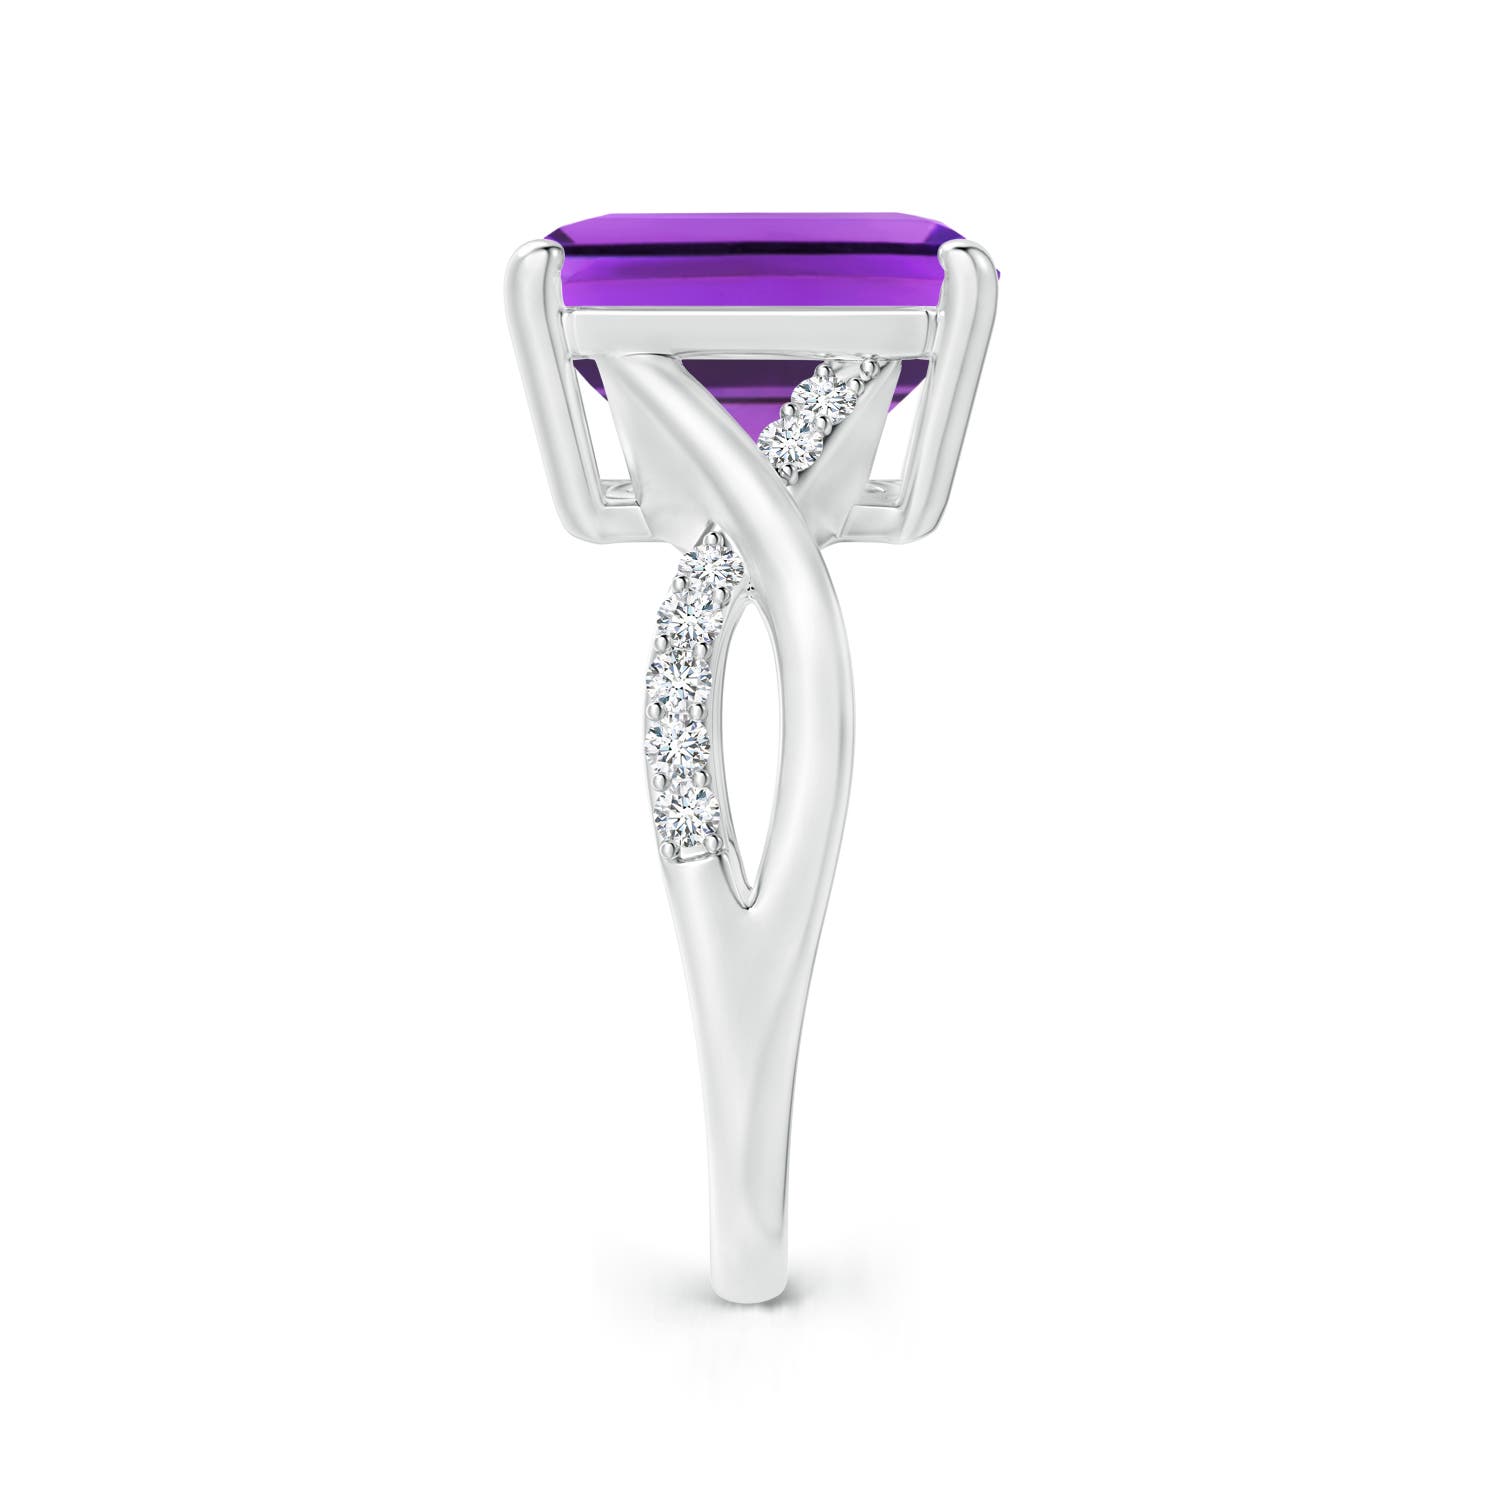 AAA - Amethyst / 5.47 CT / 14 KT White Gold